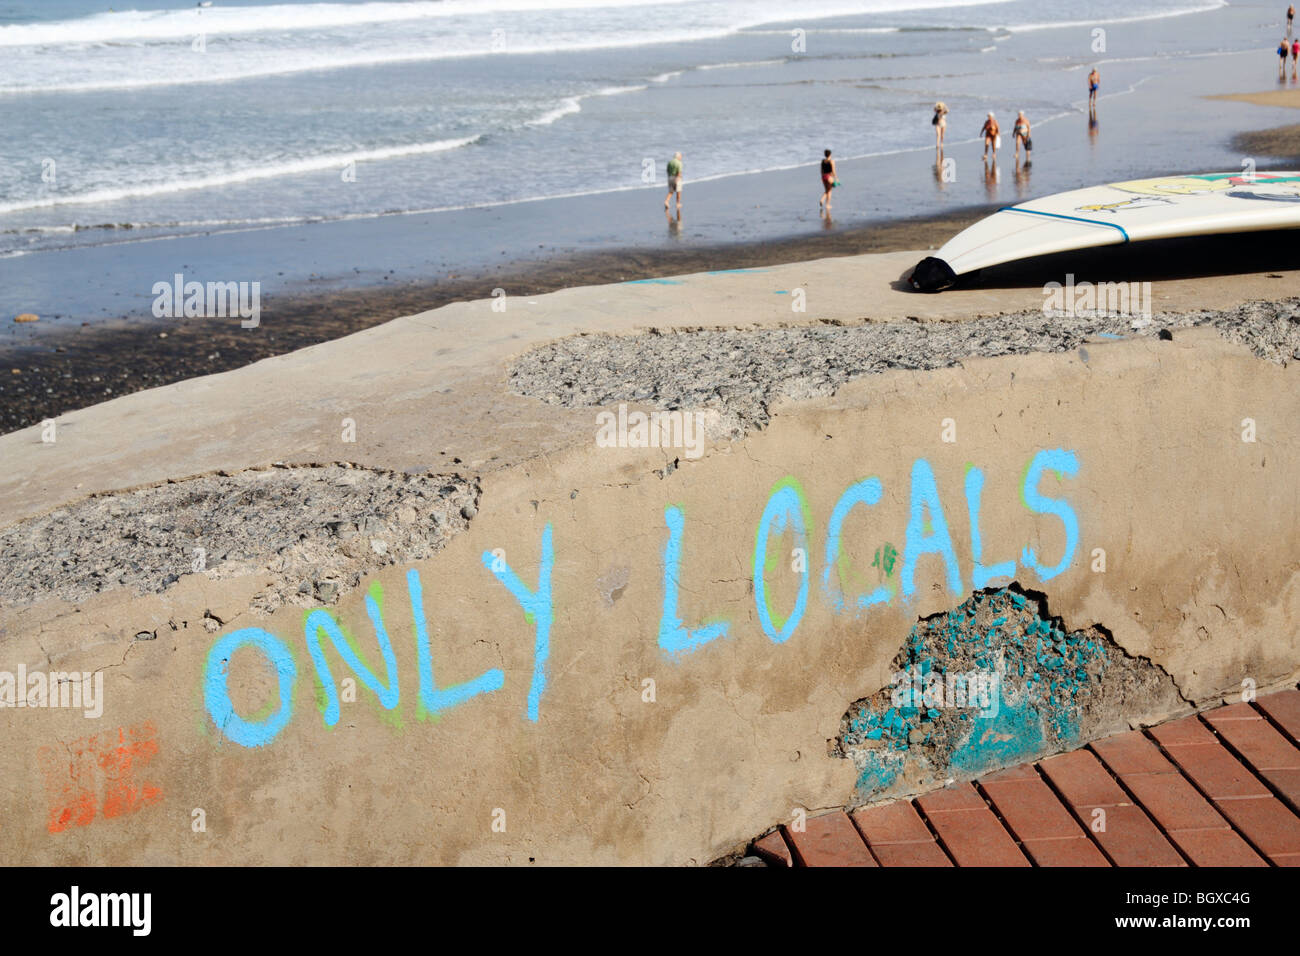 'Only Locals' painted on wall at surf break. Could be used as Brexit/isolation/ immingration... concept image Stock Photo